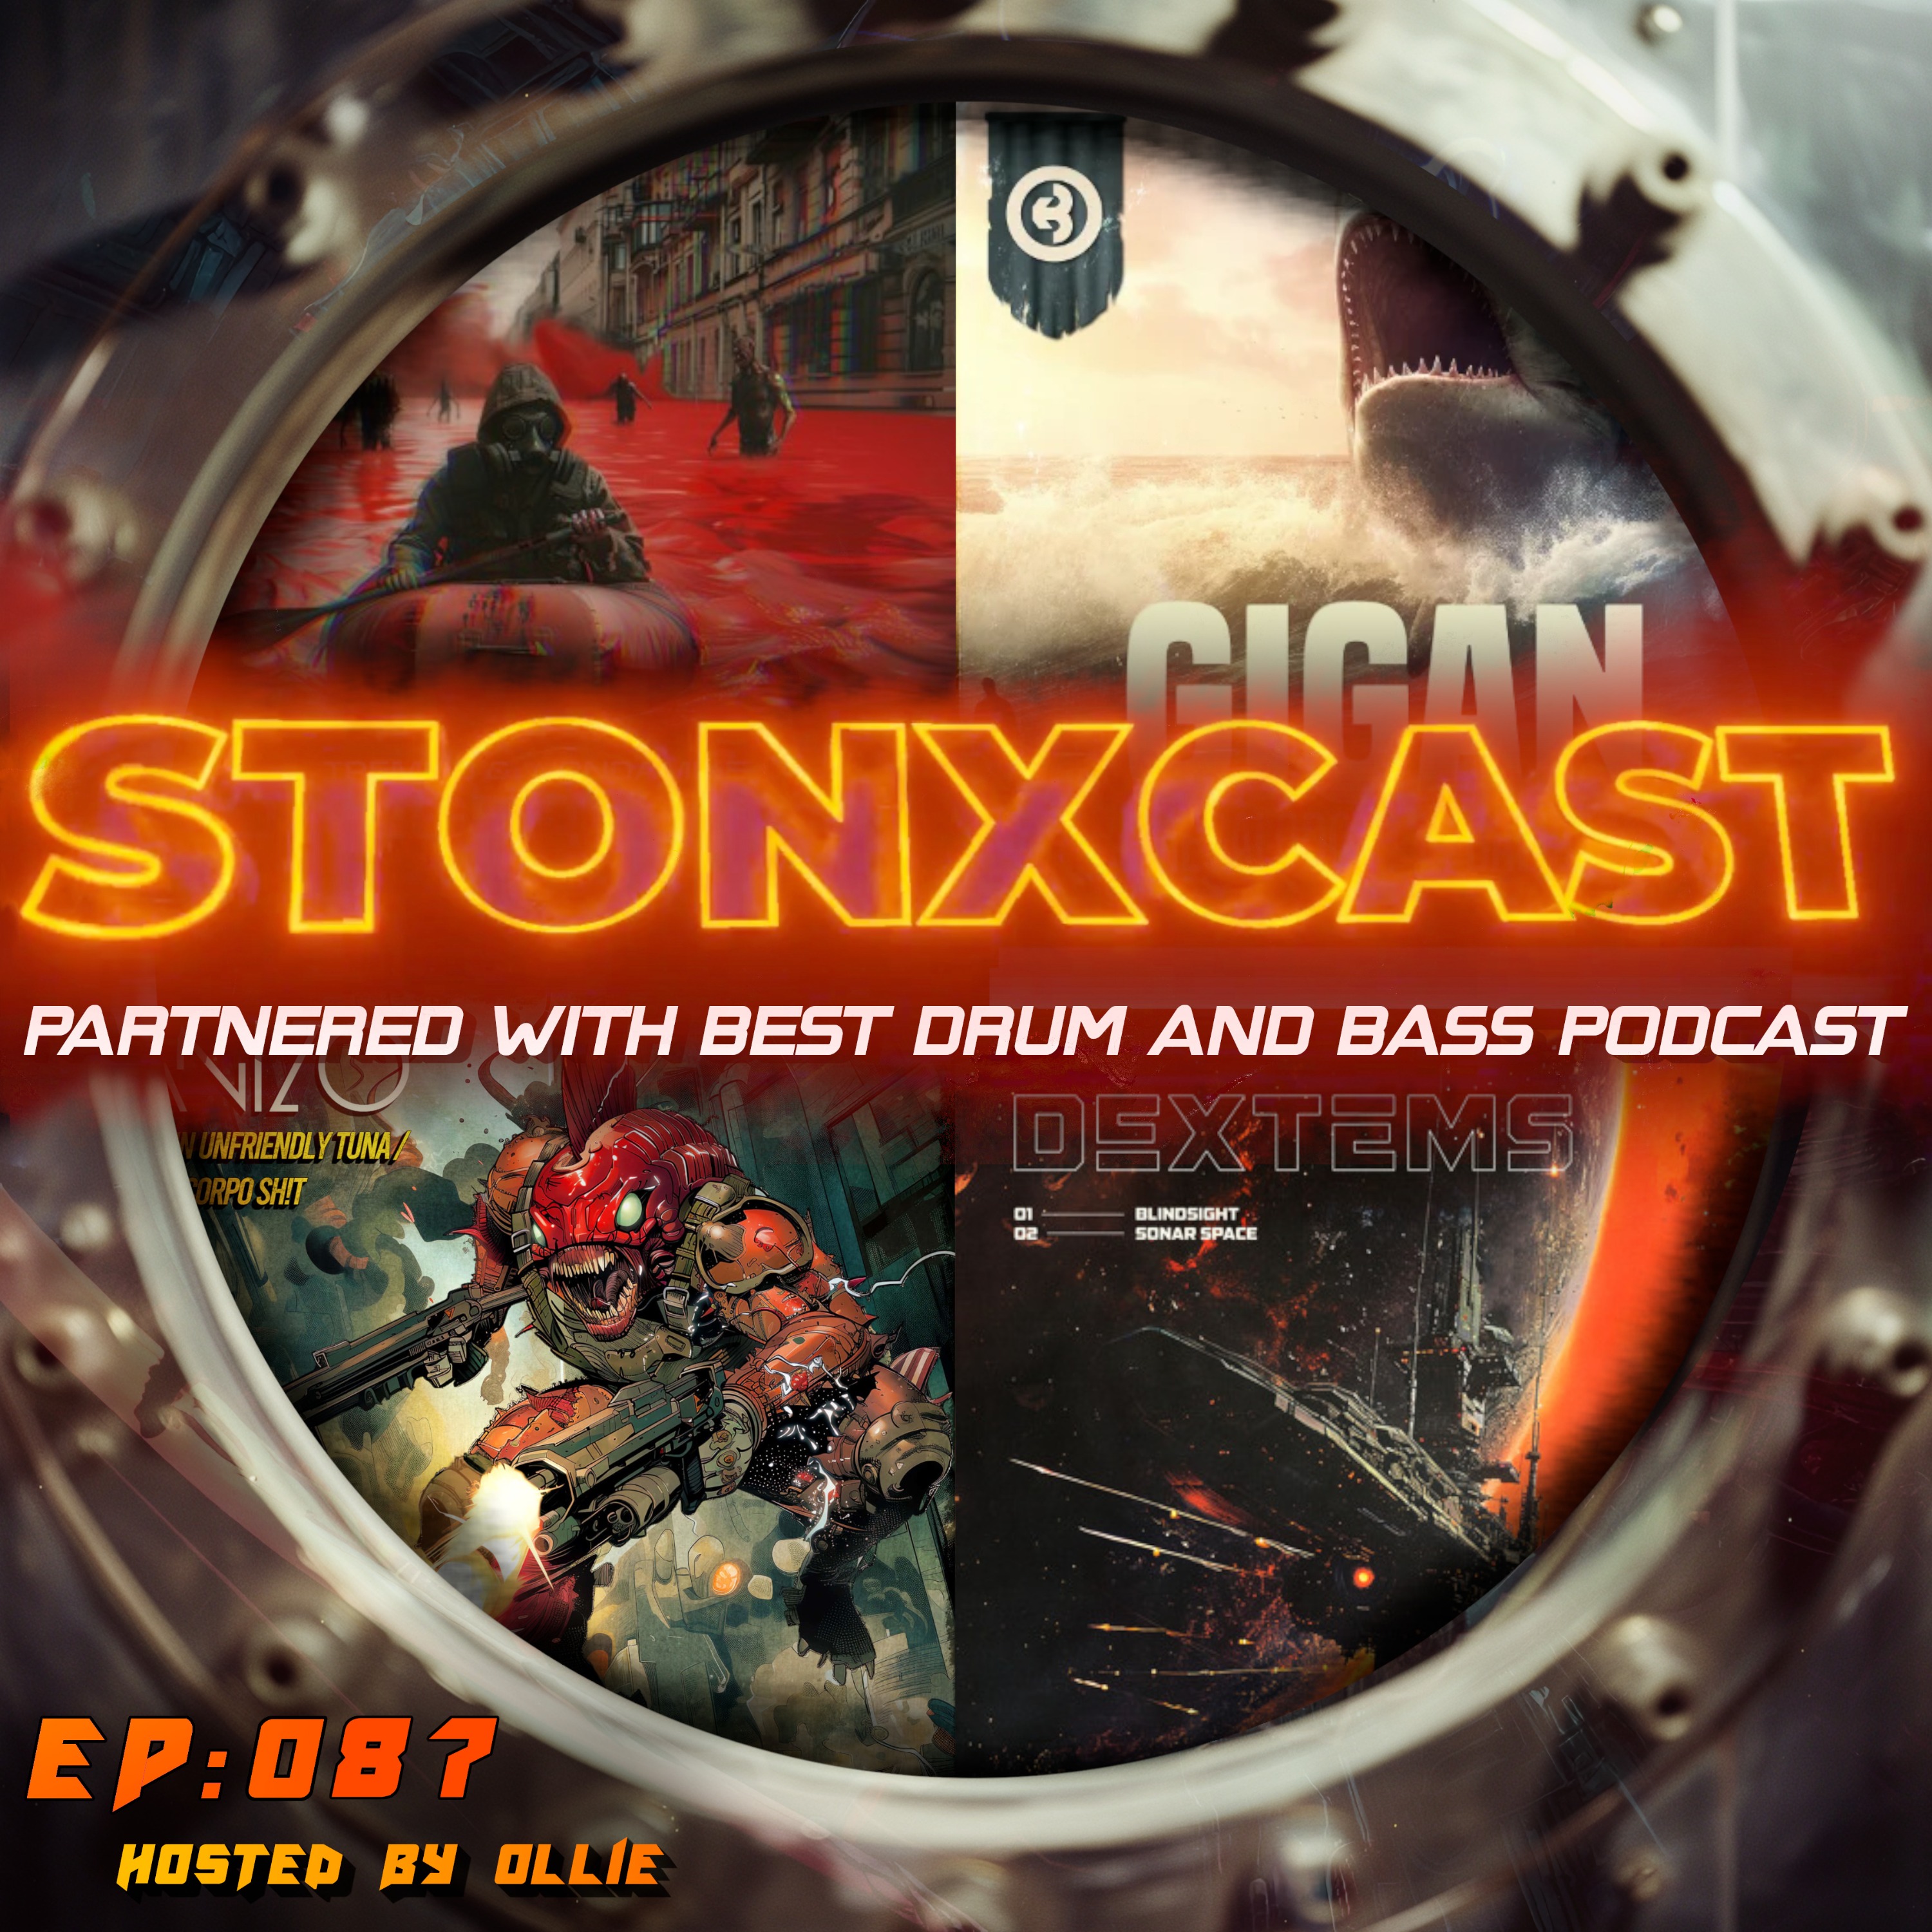 Stonxcast EP:087 - Hosted by Ollie Artwork